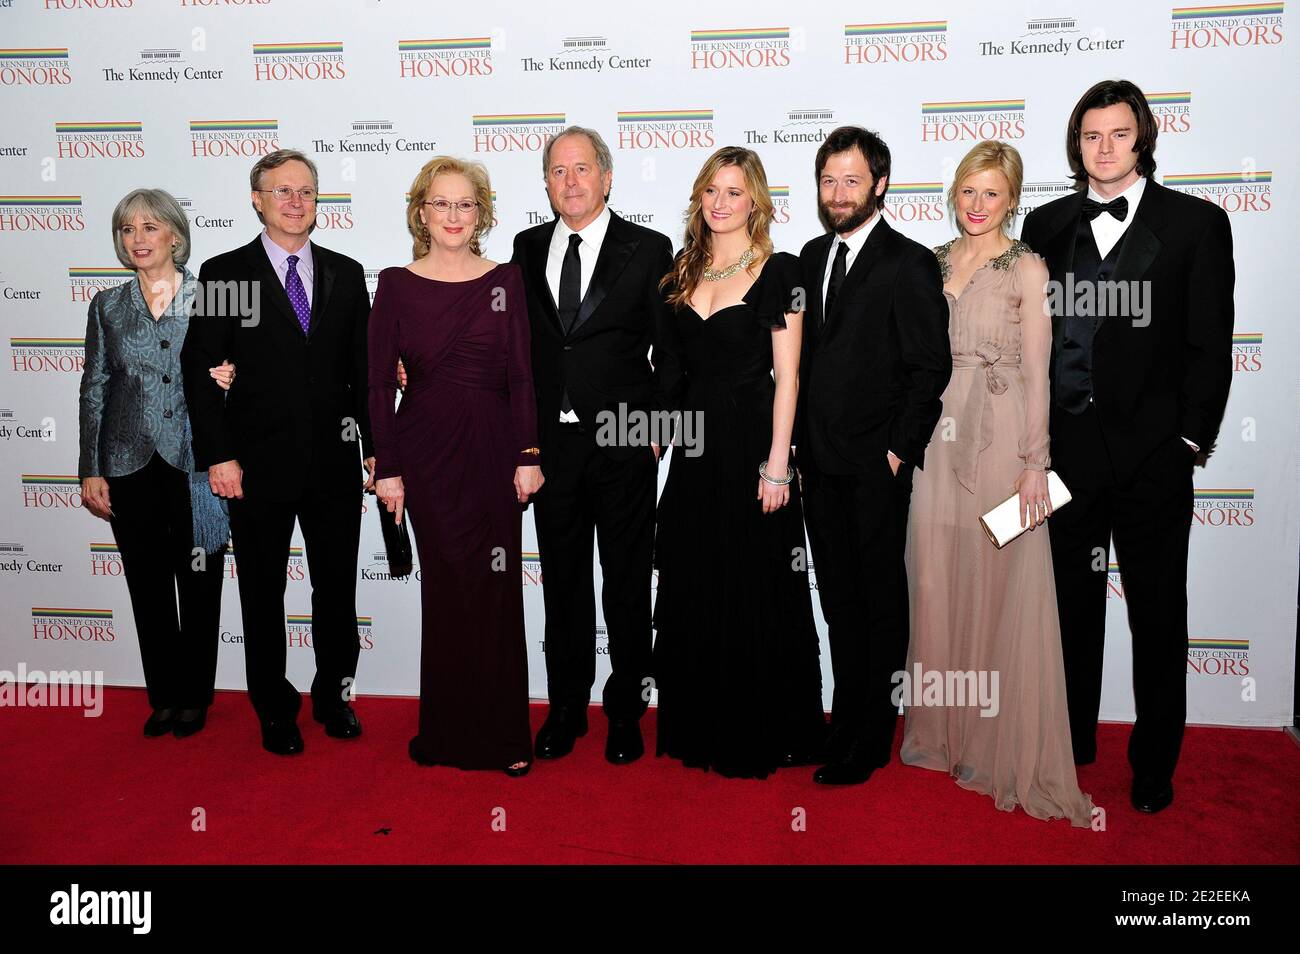 (Left top right) Maeve Kinkaid III, Harry Streep, Meryl Streep, Don Gummer, Grace Gummer, Henry Gummer, Mamie Gummer, and Ben Walker Davis arrive for the formal Artist's Dinner honoring the recipients of the 2011 Kennedy Center Honors hosted by United States Secretary of State Hillary Rodham Clinton at the U.S. Department of State in Washington, D.C. on December 3, 2011. The 2011 honorees are actress Meryl Streep, singer Neil Diamond, actress Barbara Cook, musician Yo-Yo Ma, and musician Sonny Rollins. Photo by Ron Sachs/CNP/ABACAPRESS.COM Stock Photo